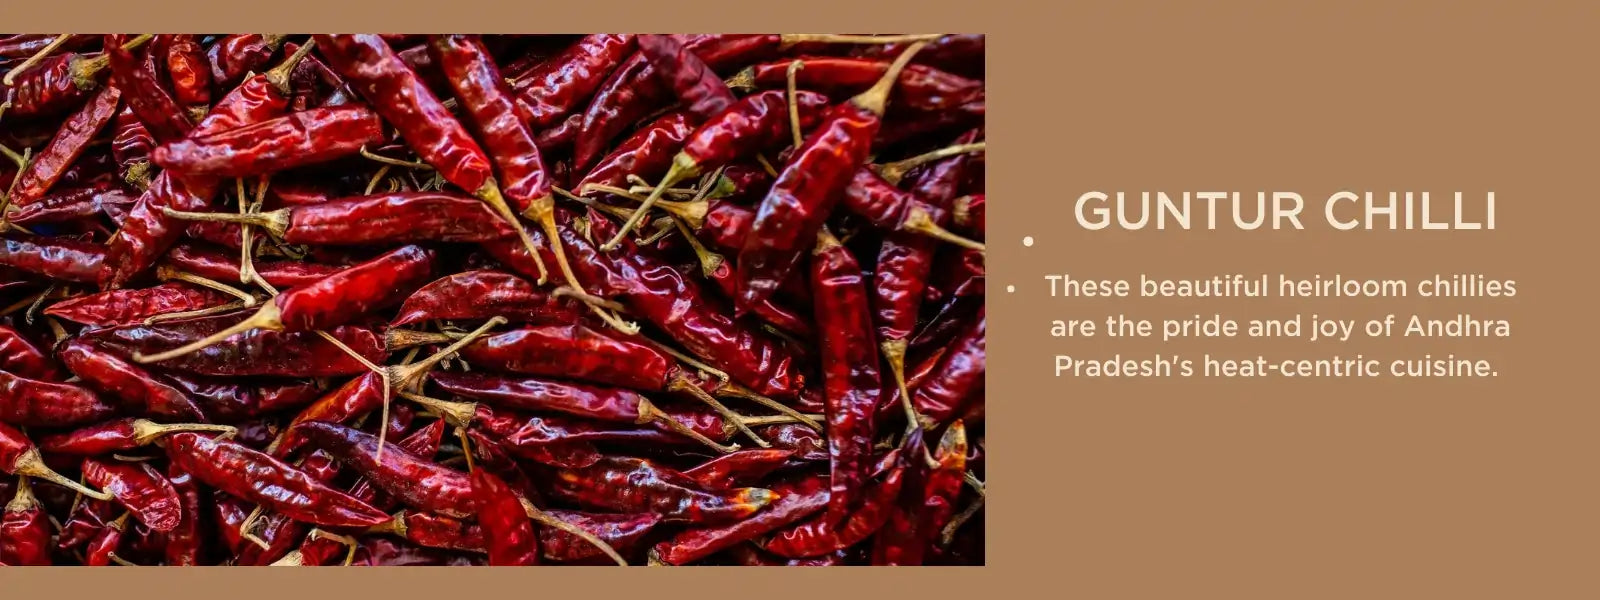 Guntur chilli - Health Benefits, Uses and Important Facts